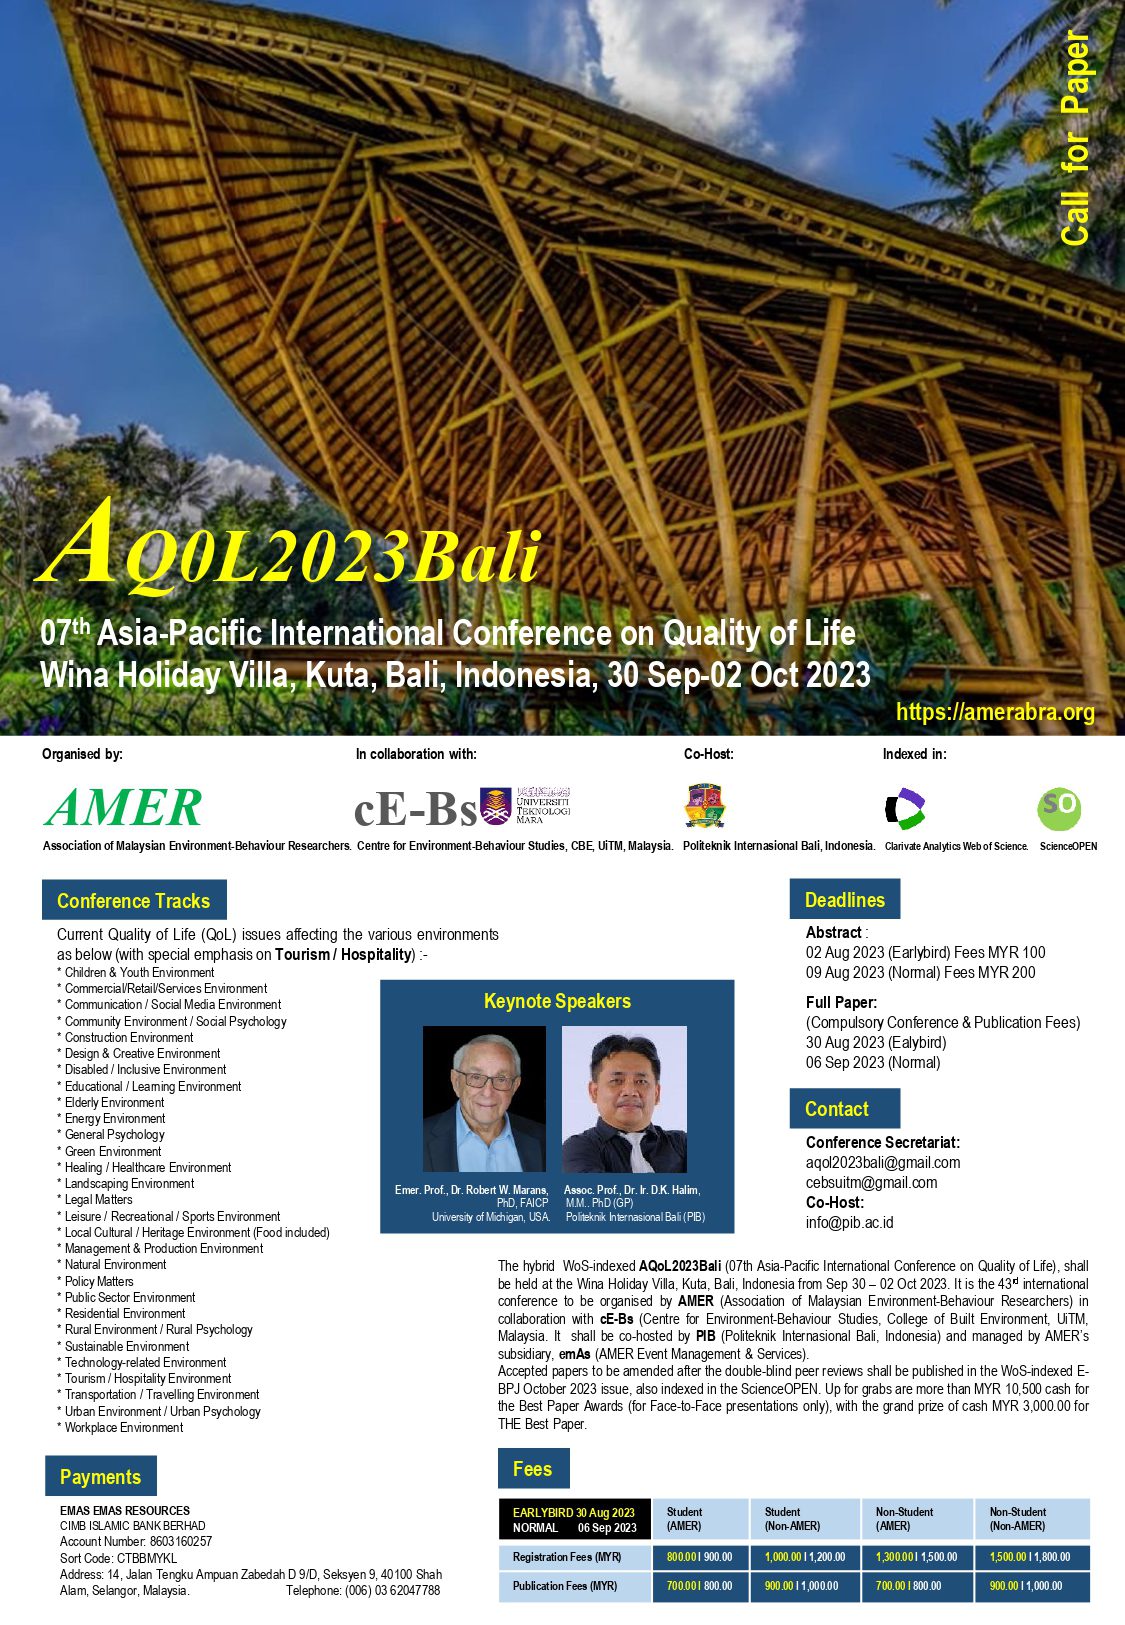 CALL FOR PAPERS: The 7th Asia-Pacific International Conference on Quality of Life (AQoL) 2023